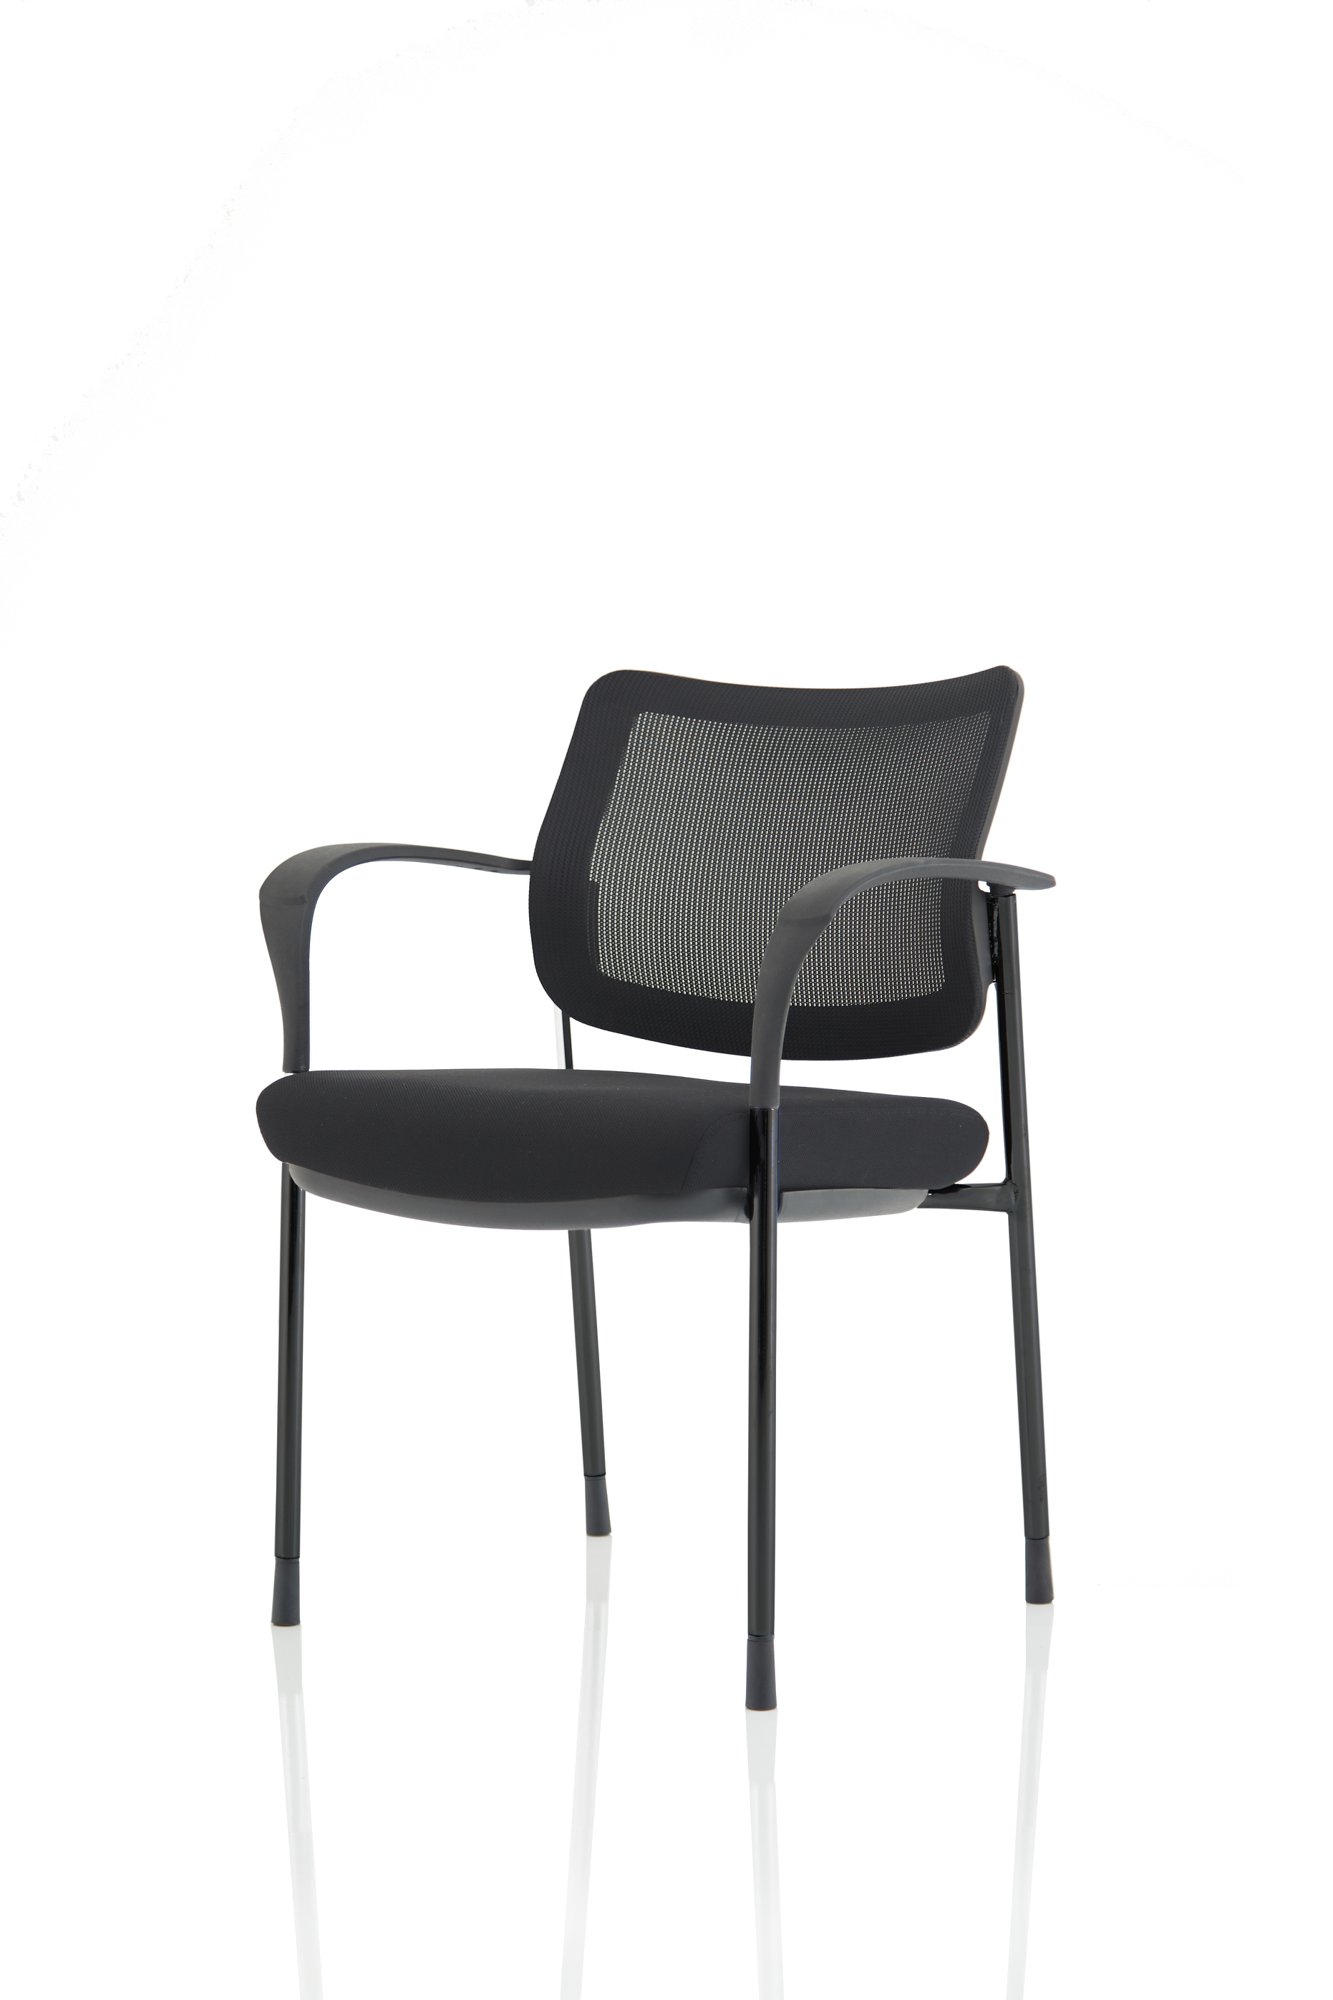 Stacking Chairs Brunswick Deluxe Mesh Back Black Frame BR000221